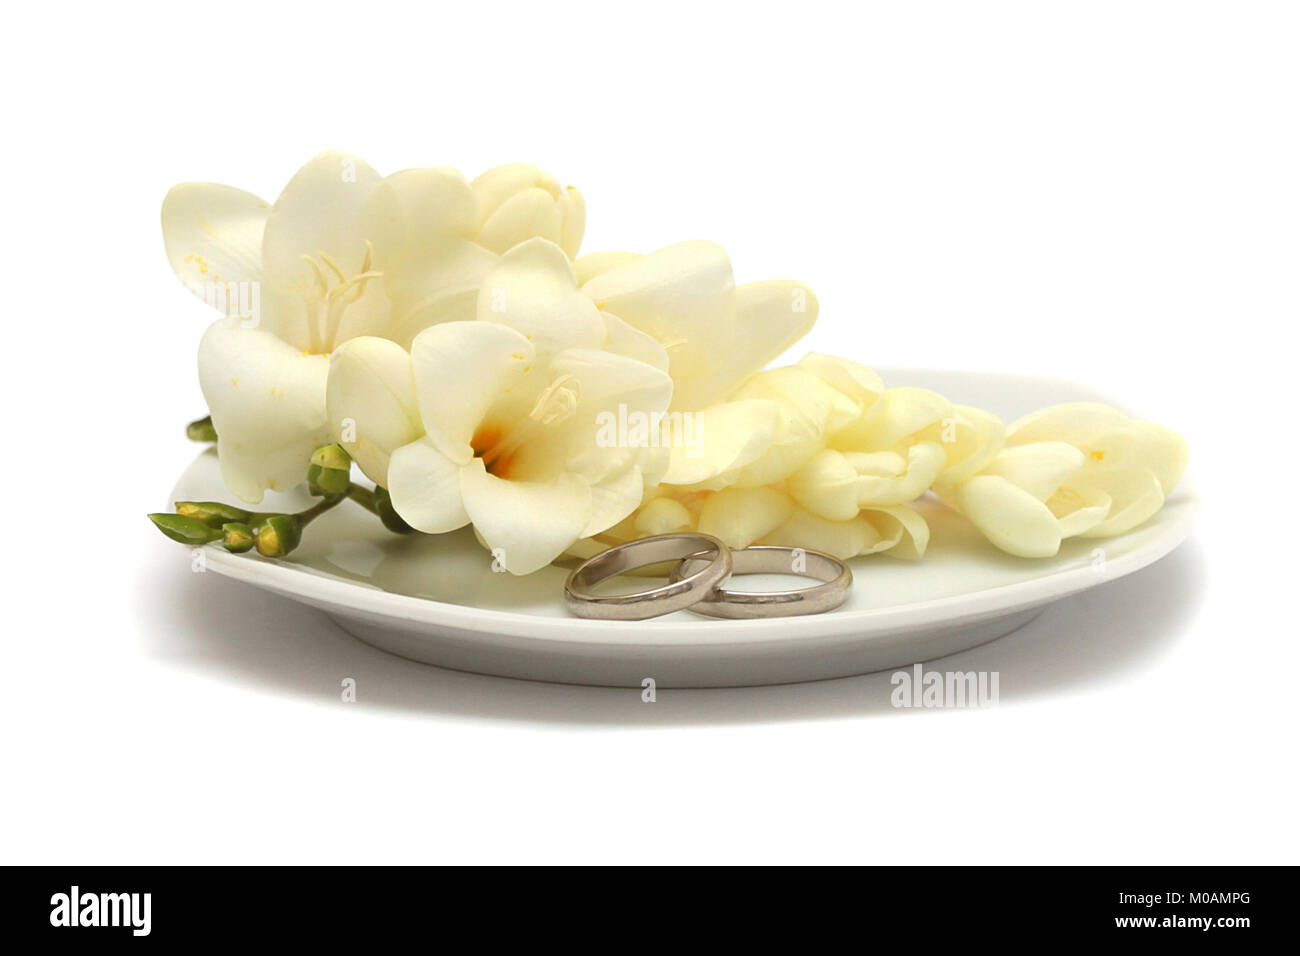 Two wedding platinum rings and flowers on a white plate Stock Photo